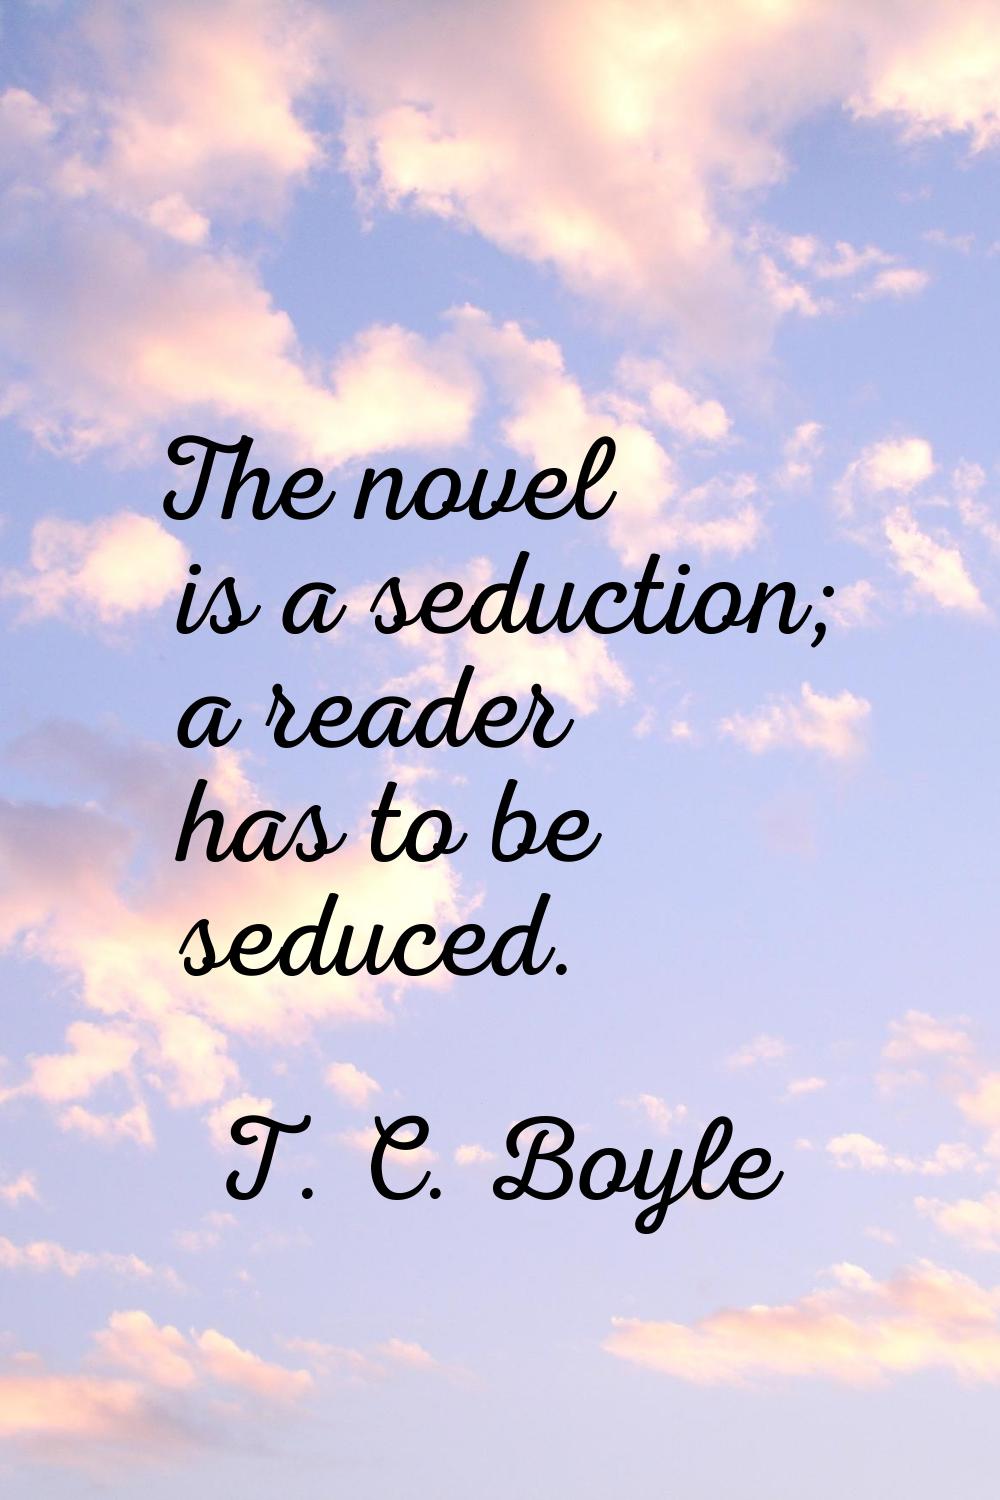 The novel is a seduction; a reader has to be seduced.